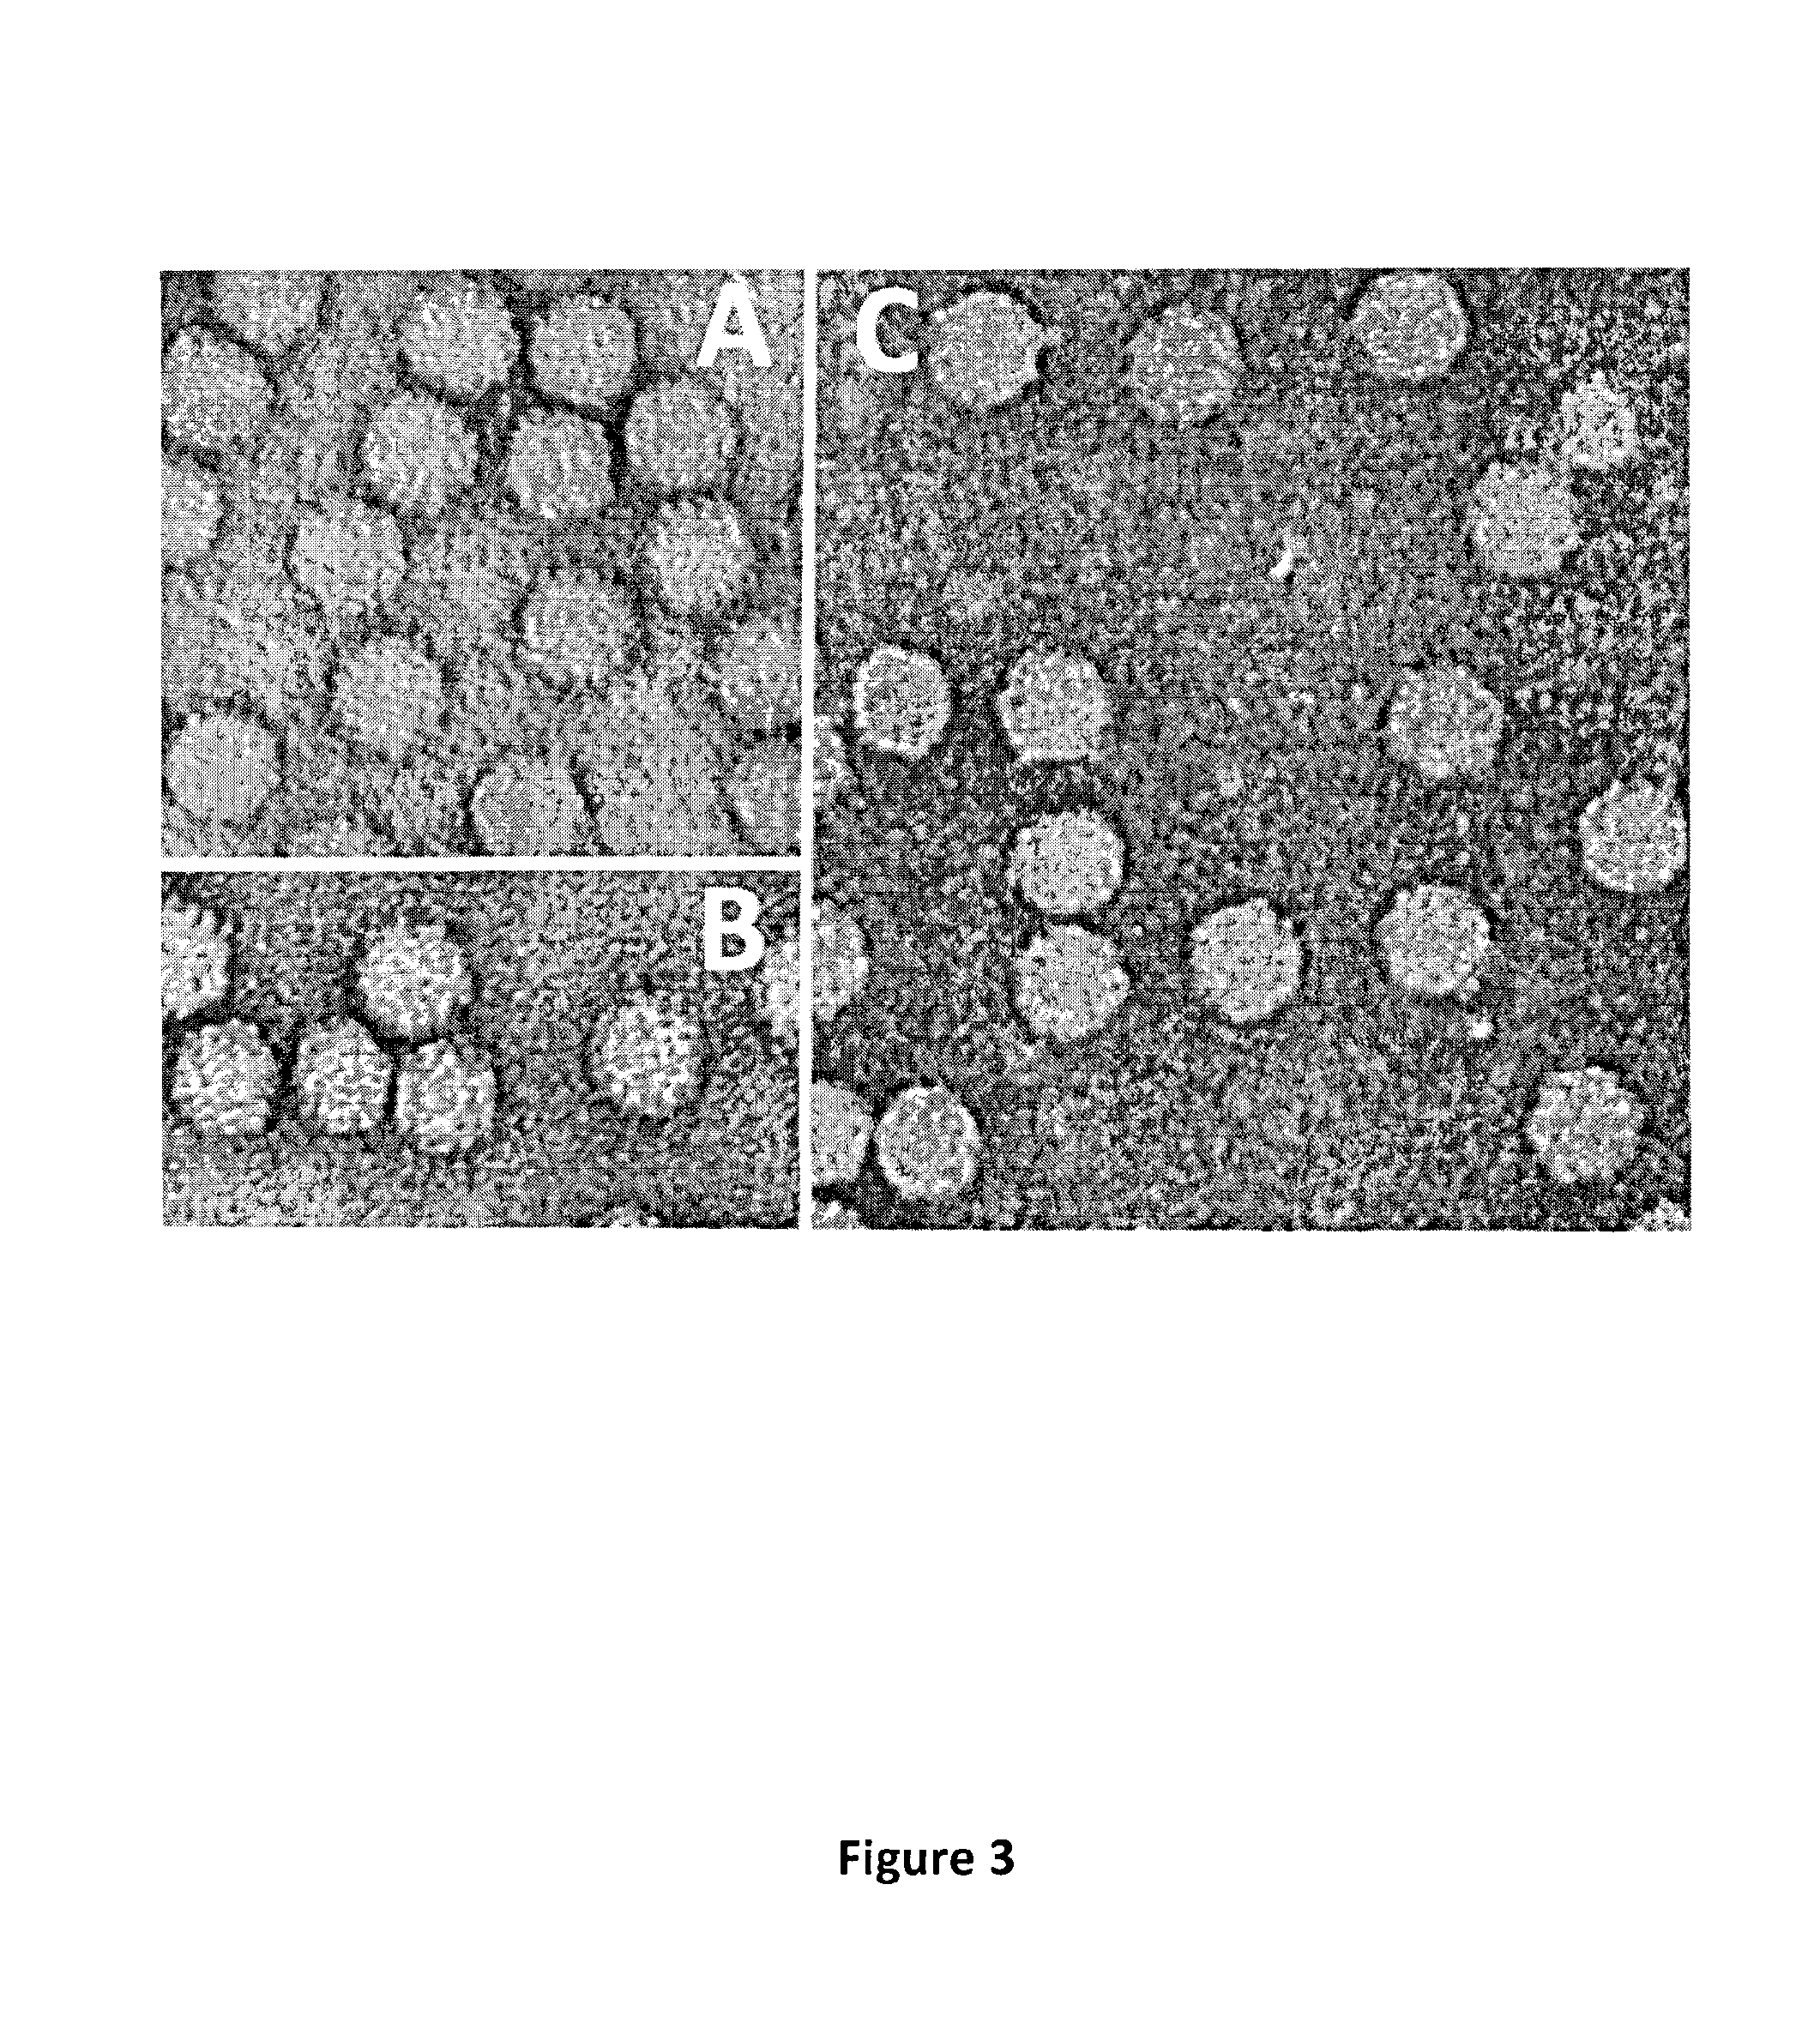 AAV8 Vector with Enhanced Functional Activity and Methods of Use Thereof